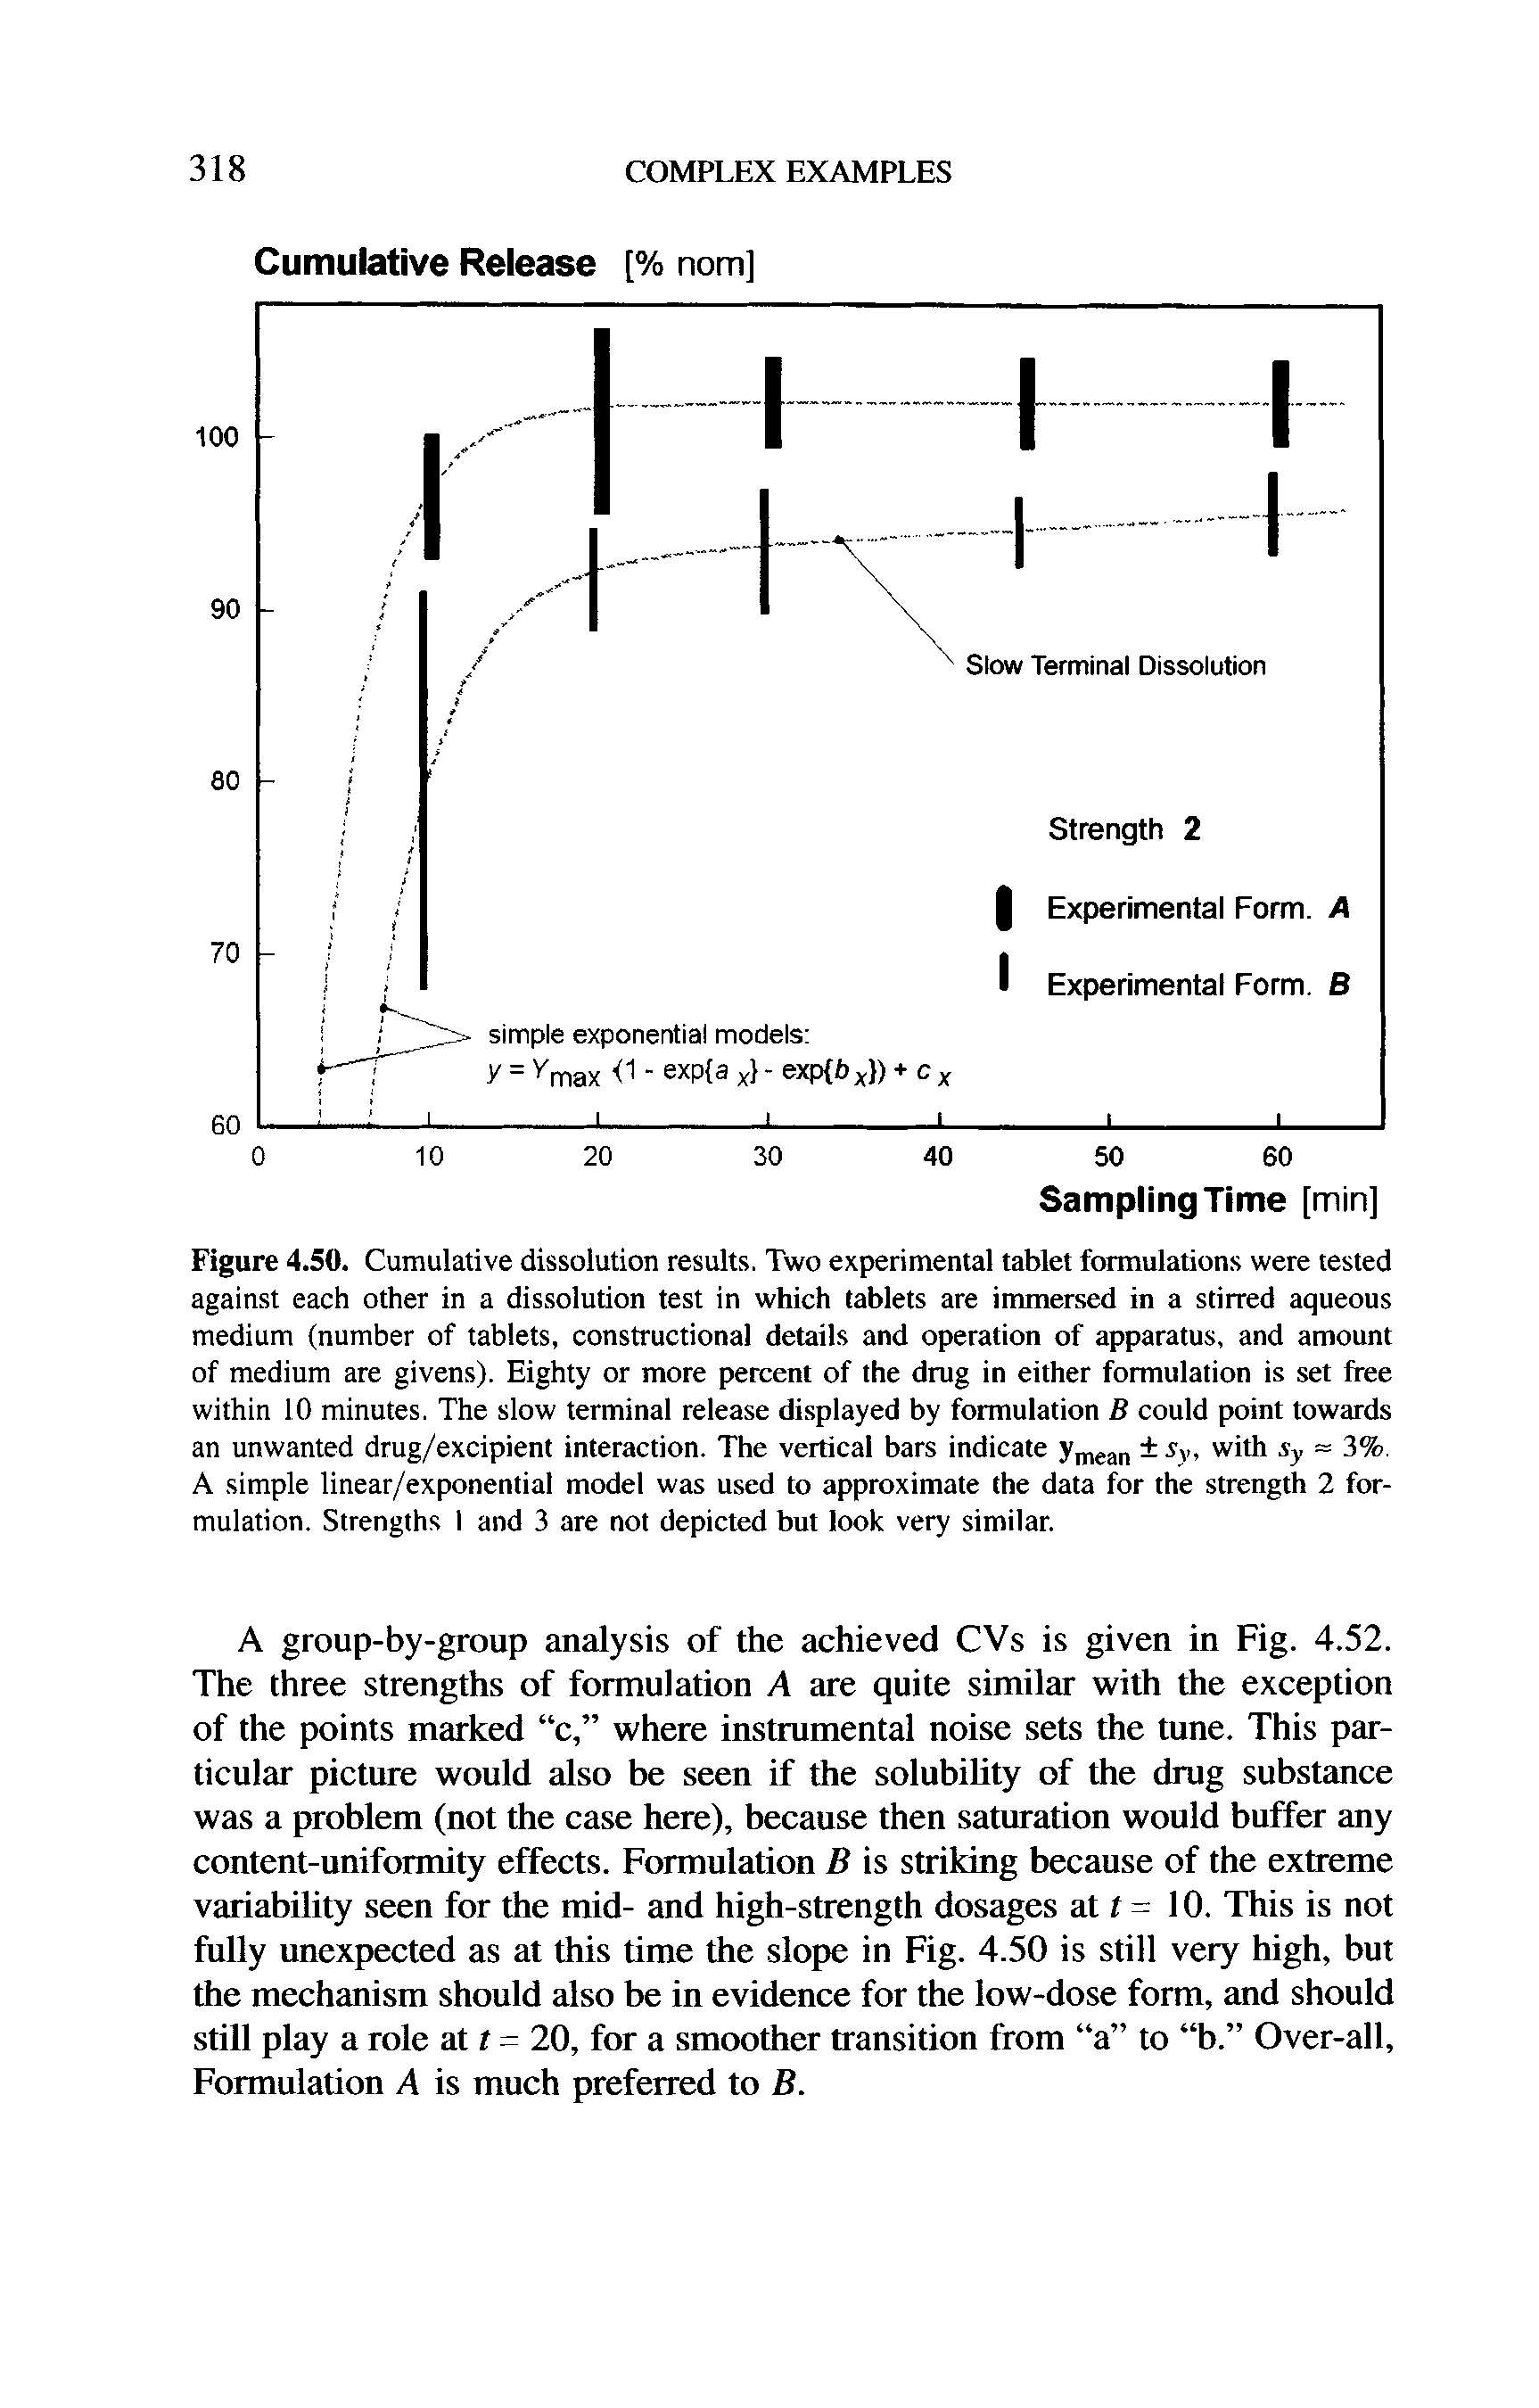 Figure 4.50. Cumulative dissolution results. Two experimental tablet formulations were tested against each other in a dissolution test in which tablets are immersed in a stirred aqueous medium (number of tablets, constructional details and operation of apparatus, and amount of medium are givens). Eighty or more percent of the drug in either formulation is set free within 10 minutes. The slow terminal release displayed by formulation B could point towards an unwanted drug/excipient interaction. The vertical bars indicate ymean - with Sy 3%. A simple linear/exponential model was used to approximate the data for the strength 2 formulation. Strengths I and 3 are not depicted but look very similar.